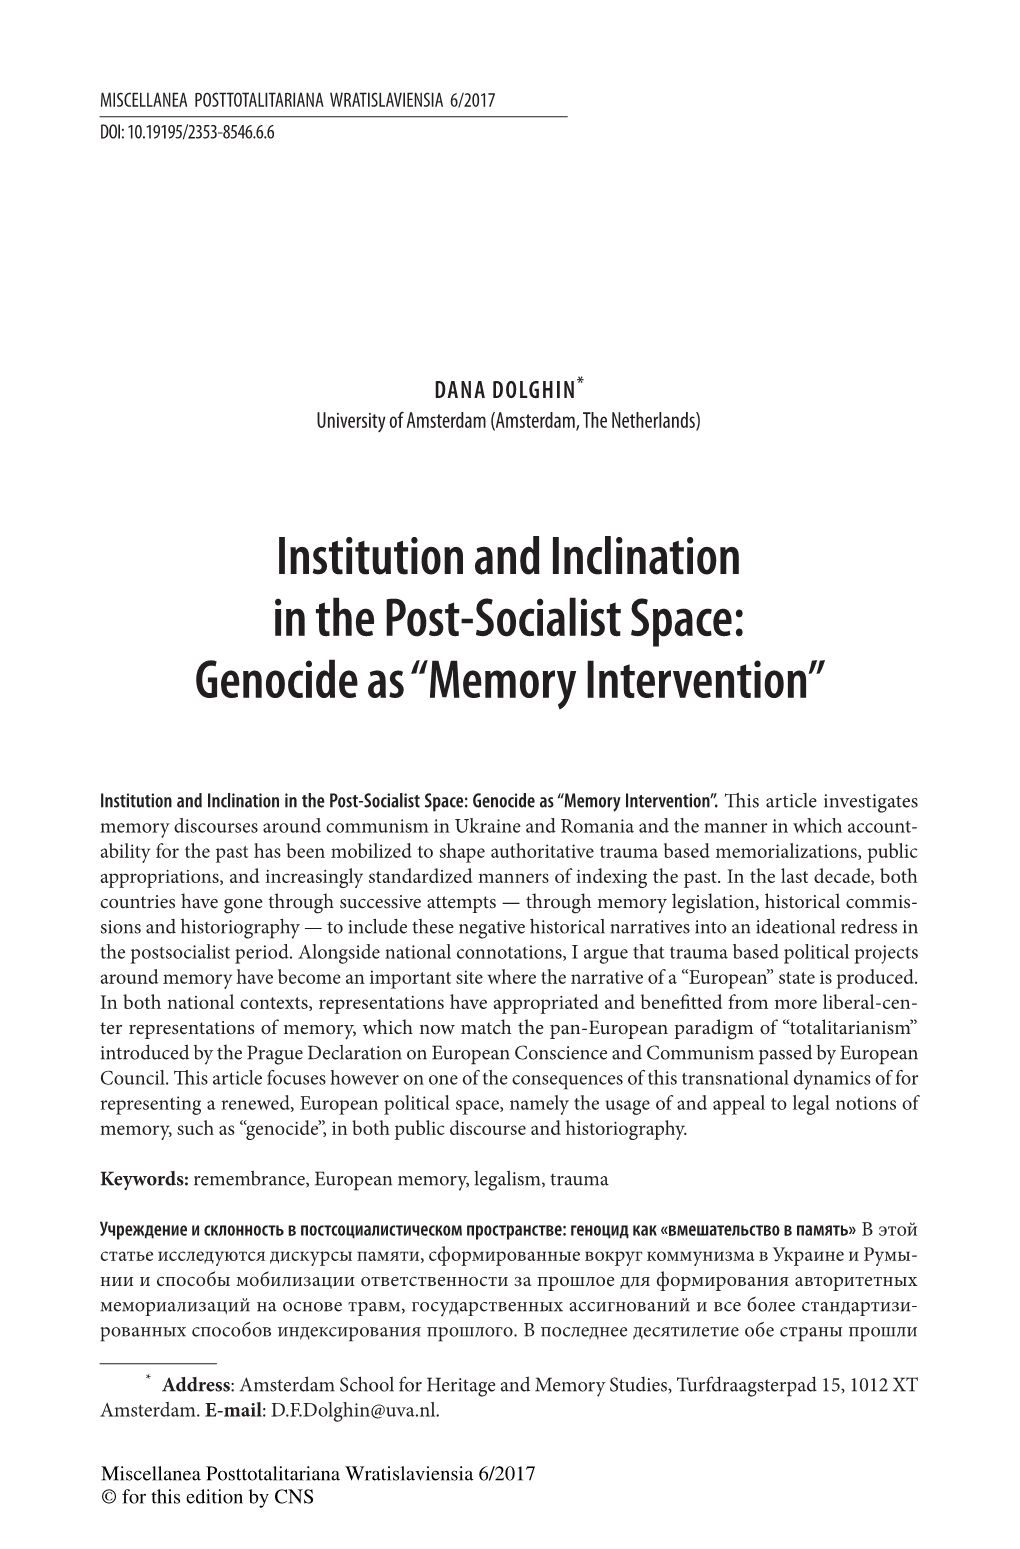 Institution and Inclination in the Post-Socialist Space: Genocide As “Memory Intervention”